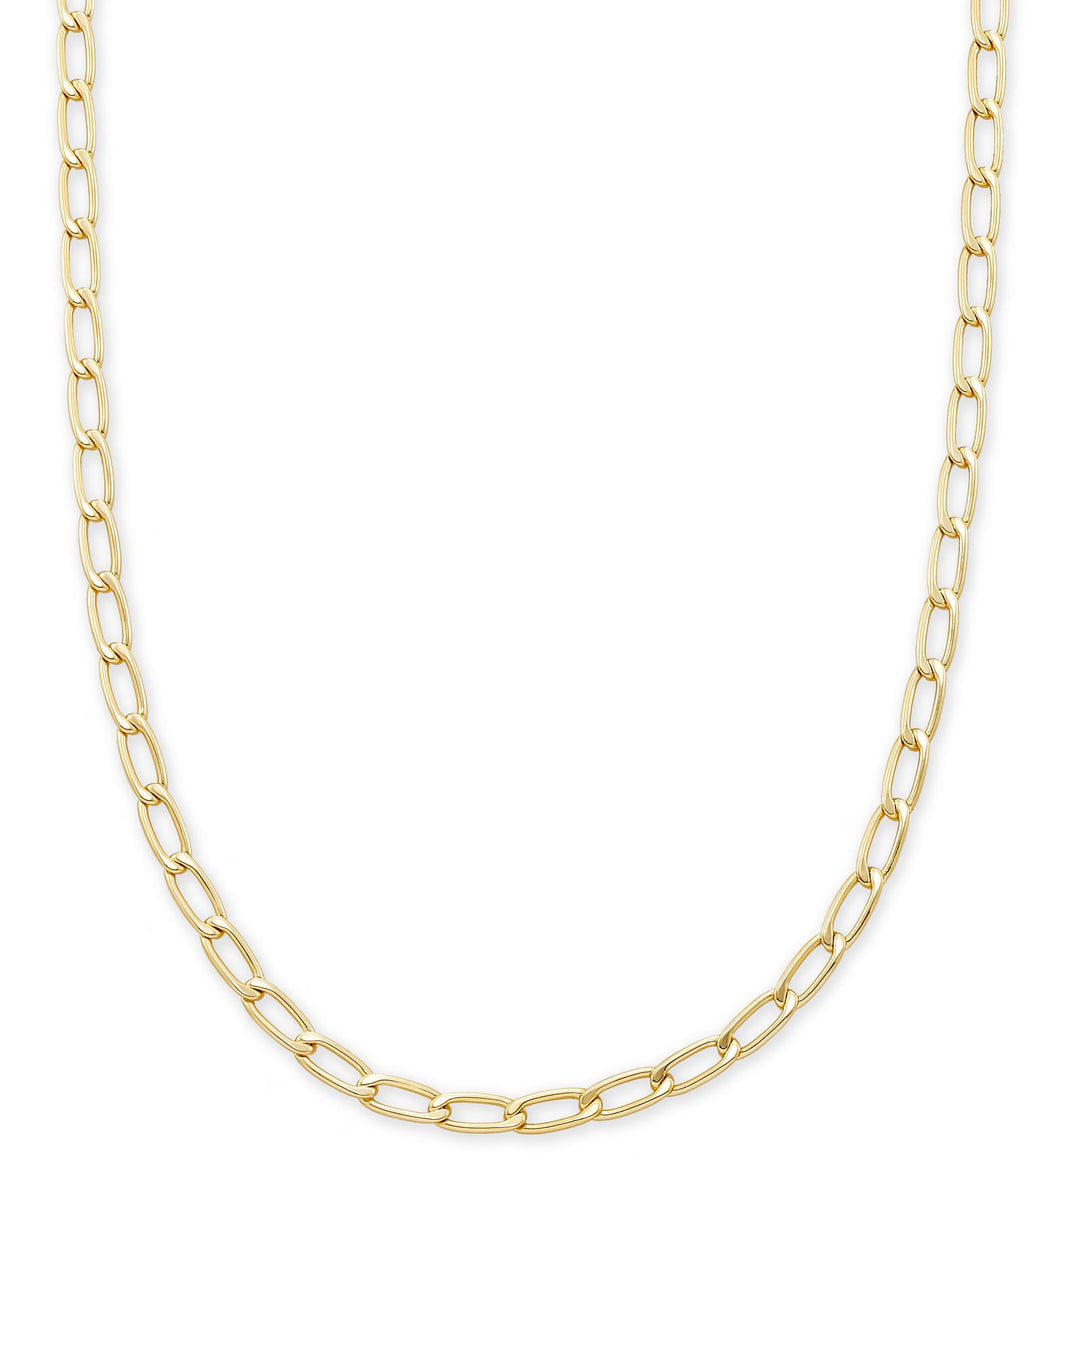 MERRICK CHAIN NECKLACE - GOLD